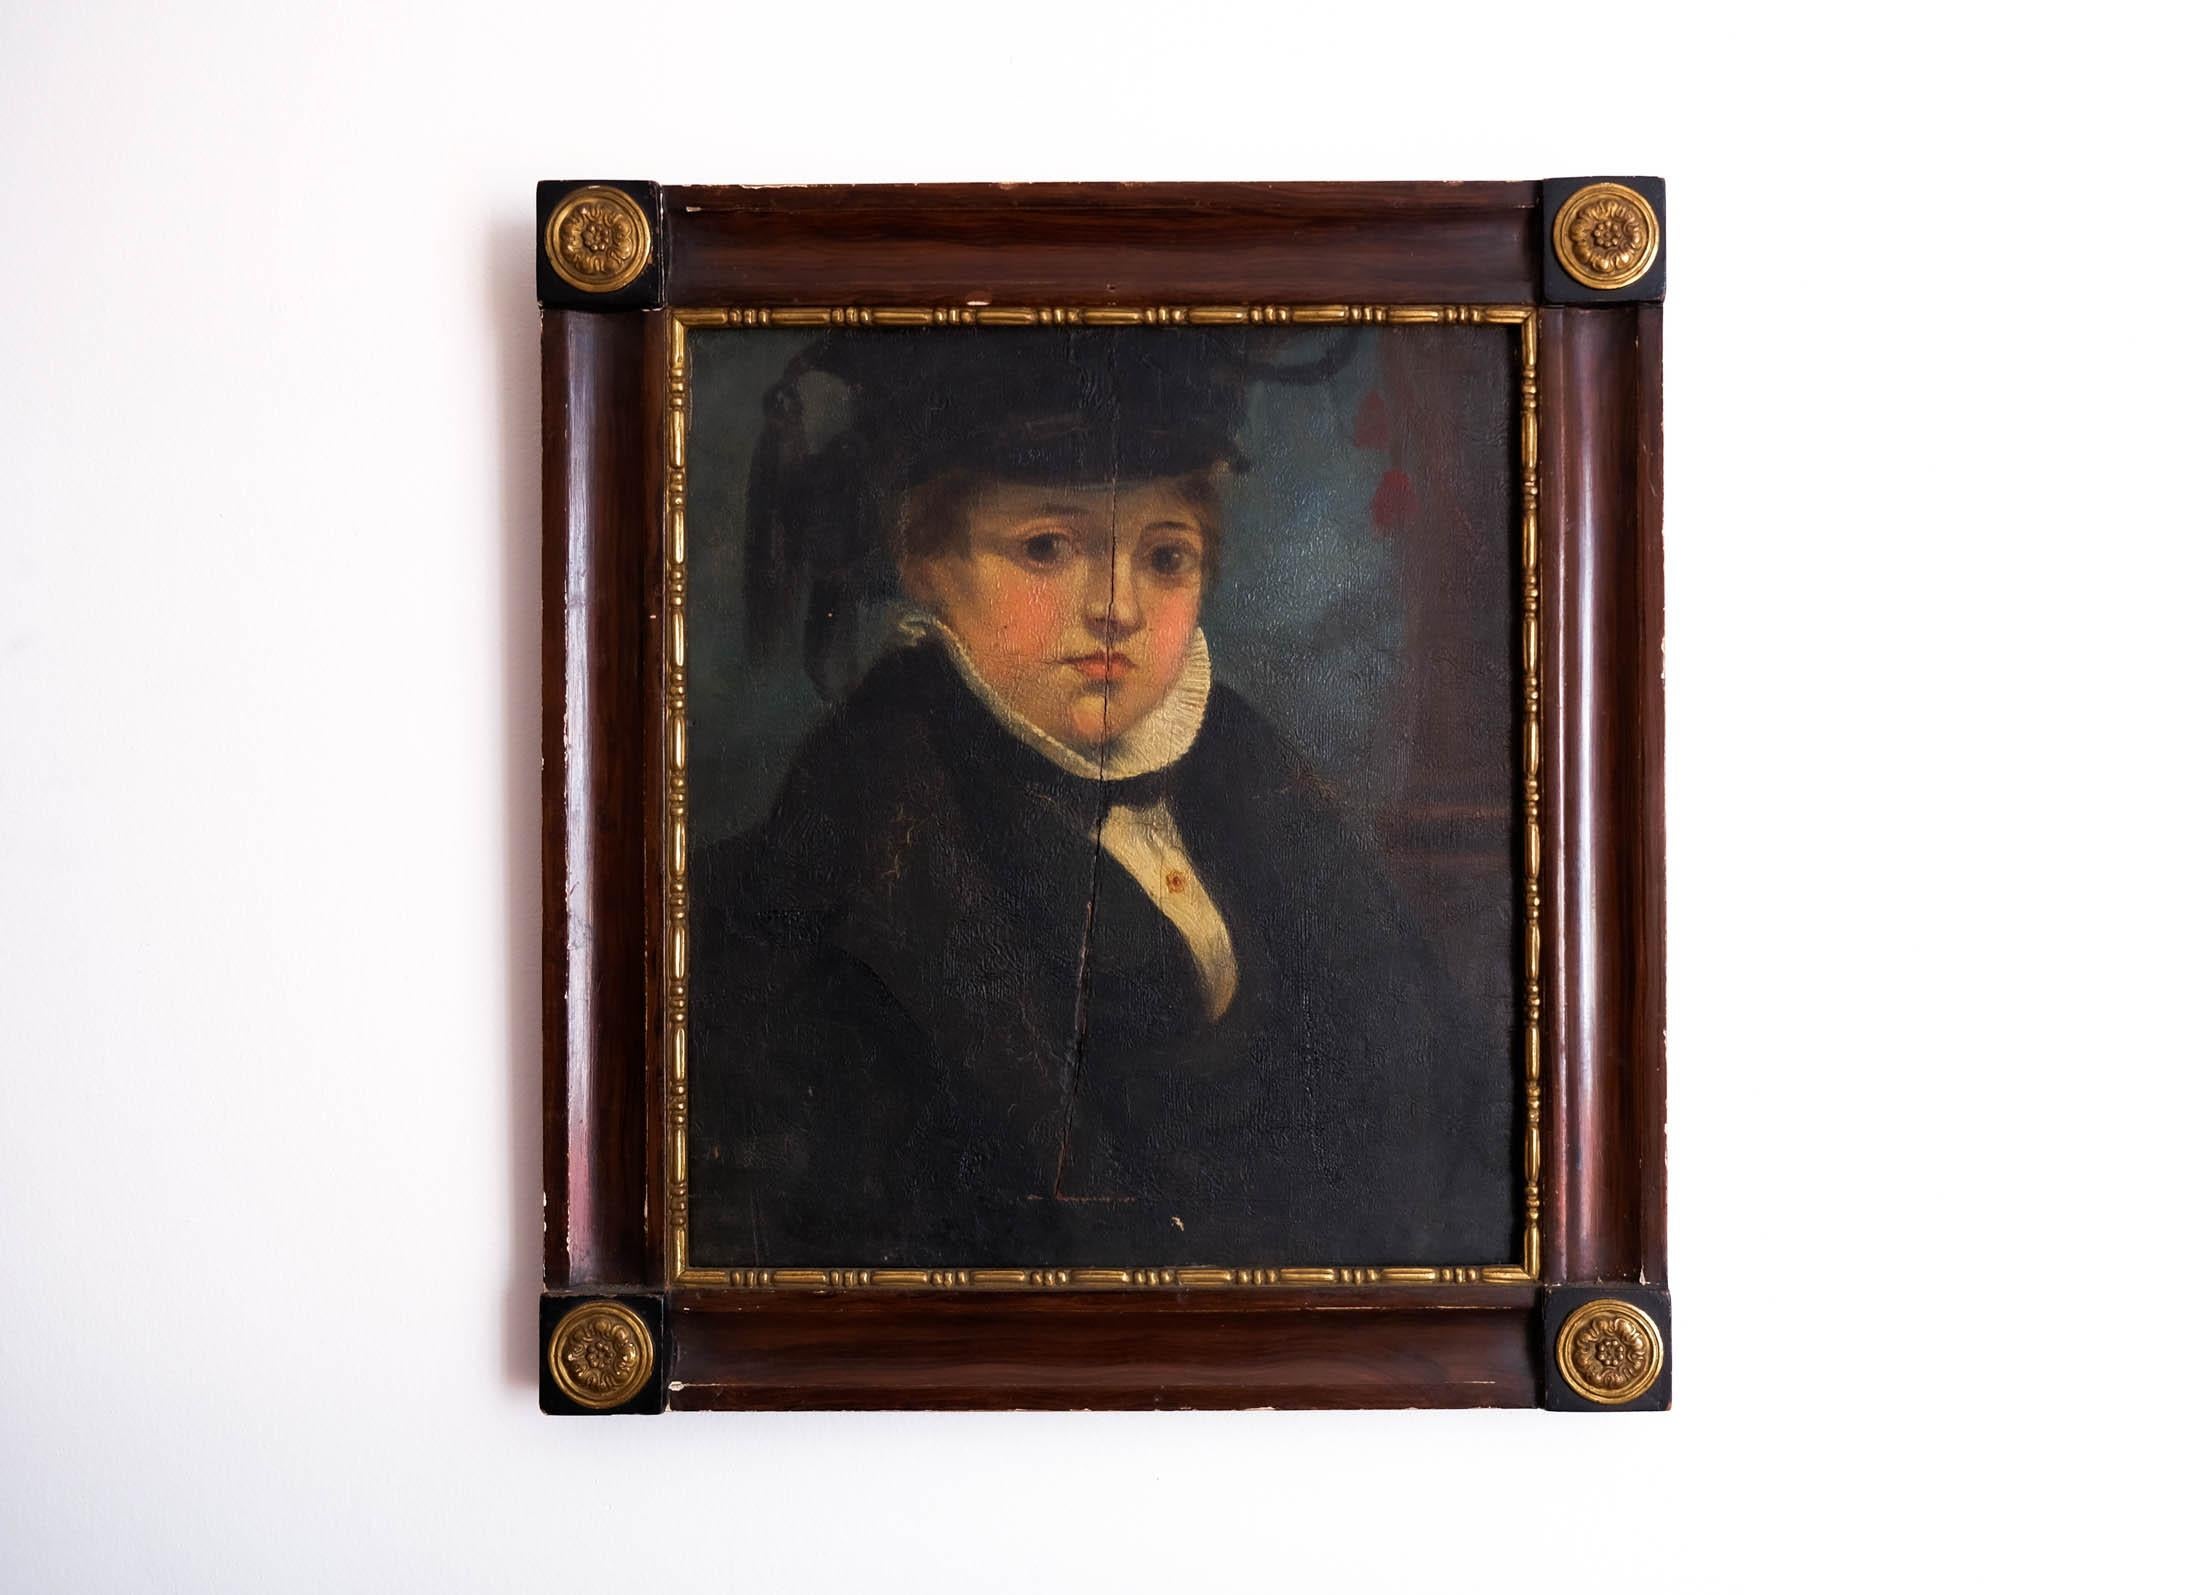 For sale a charming European late 18th, early 19th Century Georgian/Regency era oil on board portrait painting of a youthful person, possibly a scholar, believed to have been painted in circa 1820s.

The piece which is mounted in a Biedermeier